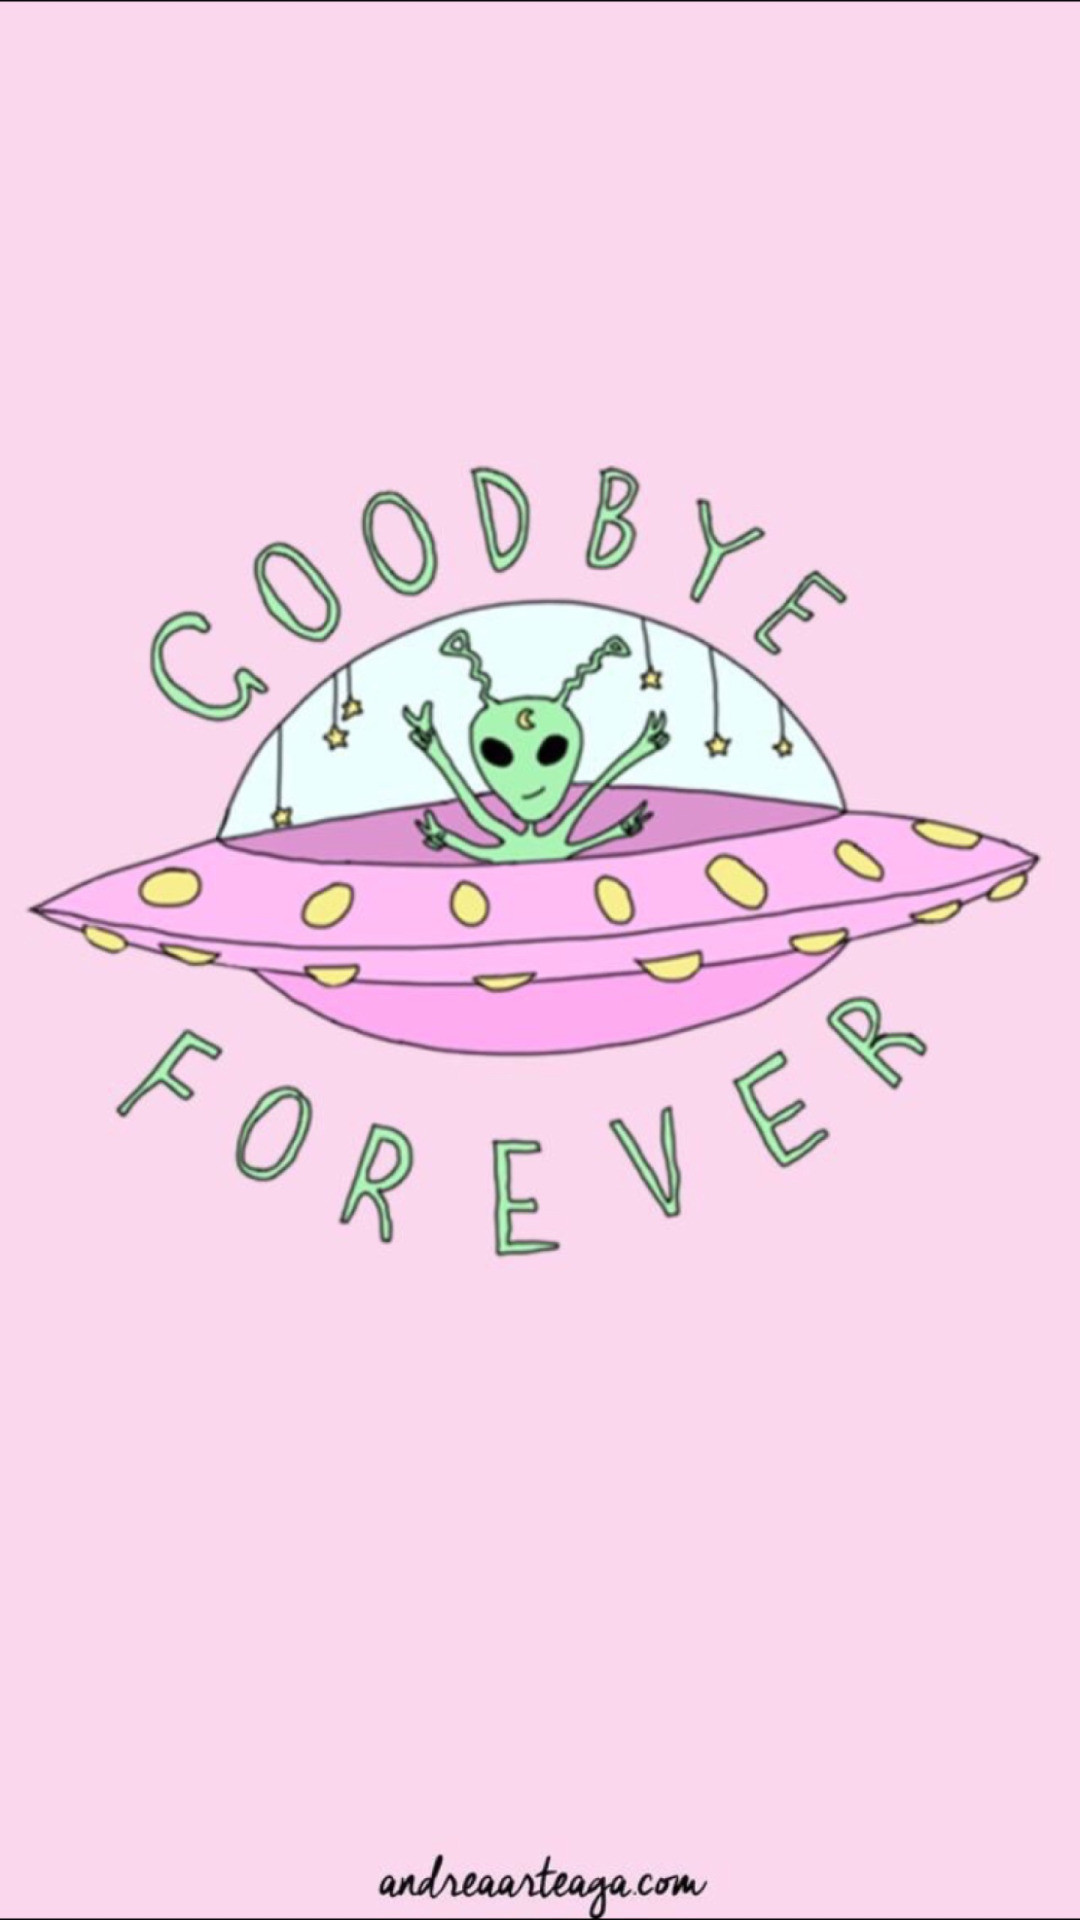 1080x1920 See this and similar accessories - goodbye drawing art cute forever hipster  Typography design green stars starry artist pink Starship type digital art  alien ...